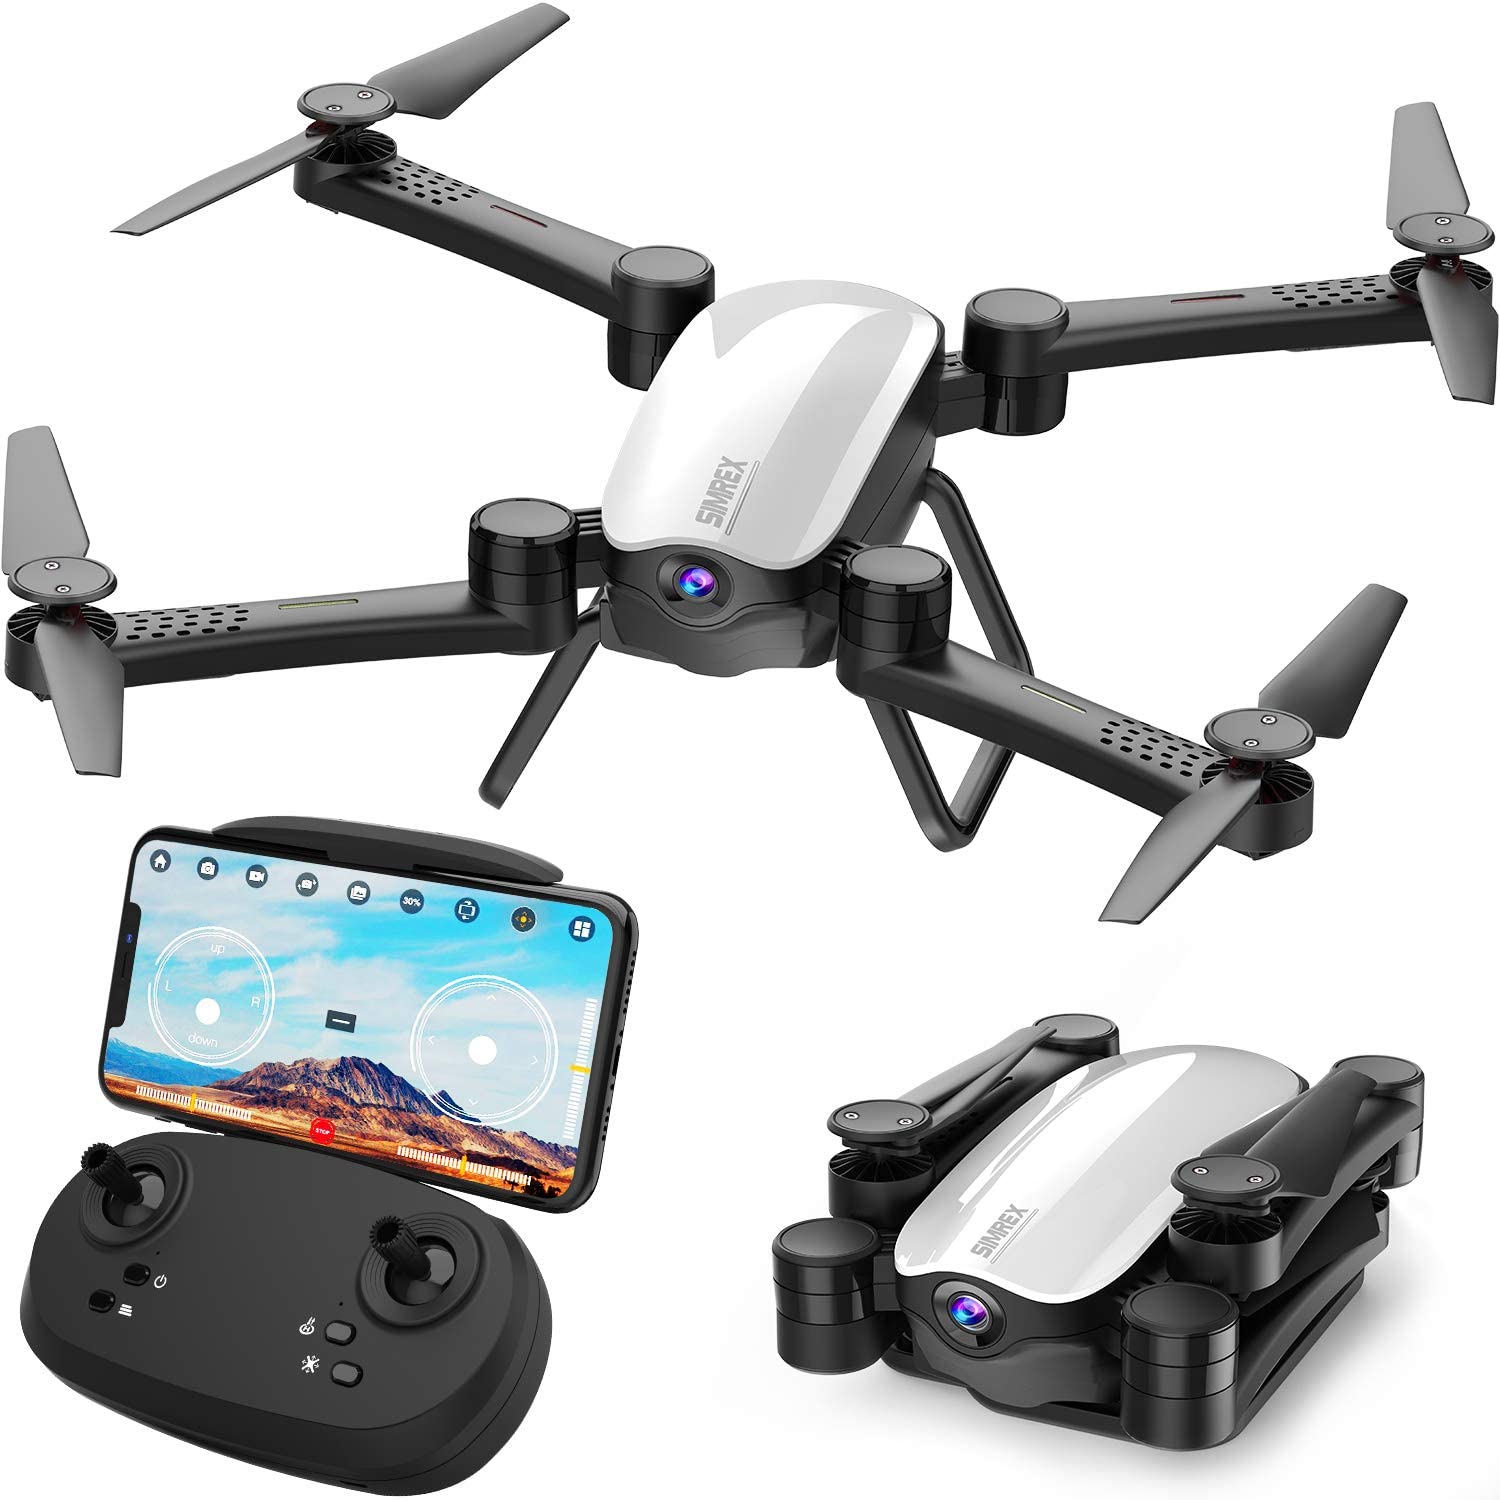 Simrex X900 Drone Optical Flow Positioning RC Quadcopter with 1080P HD Camera